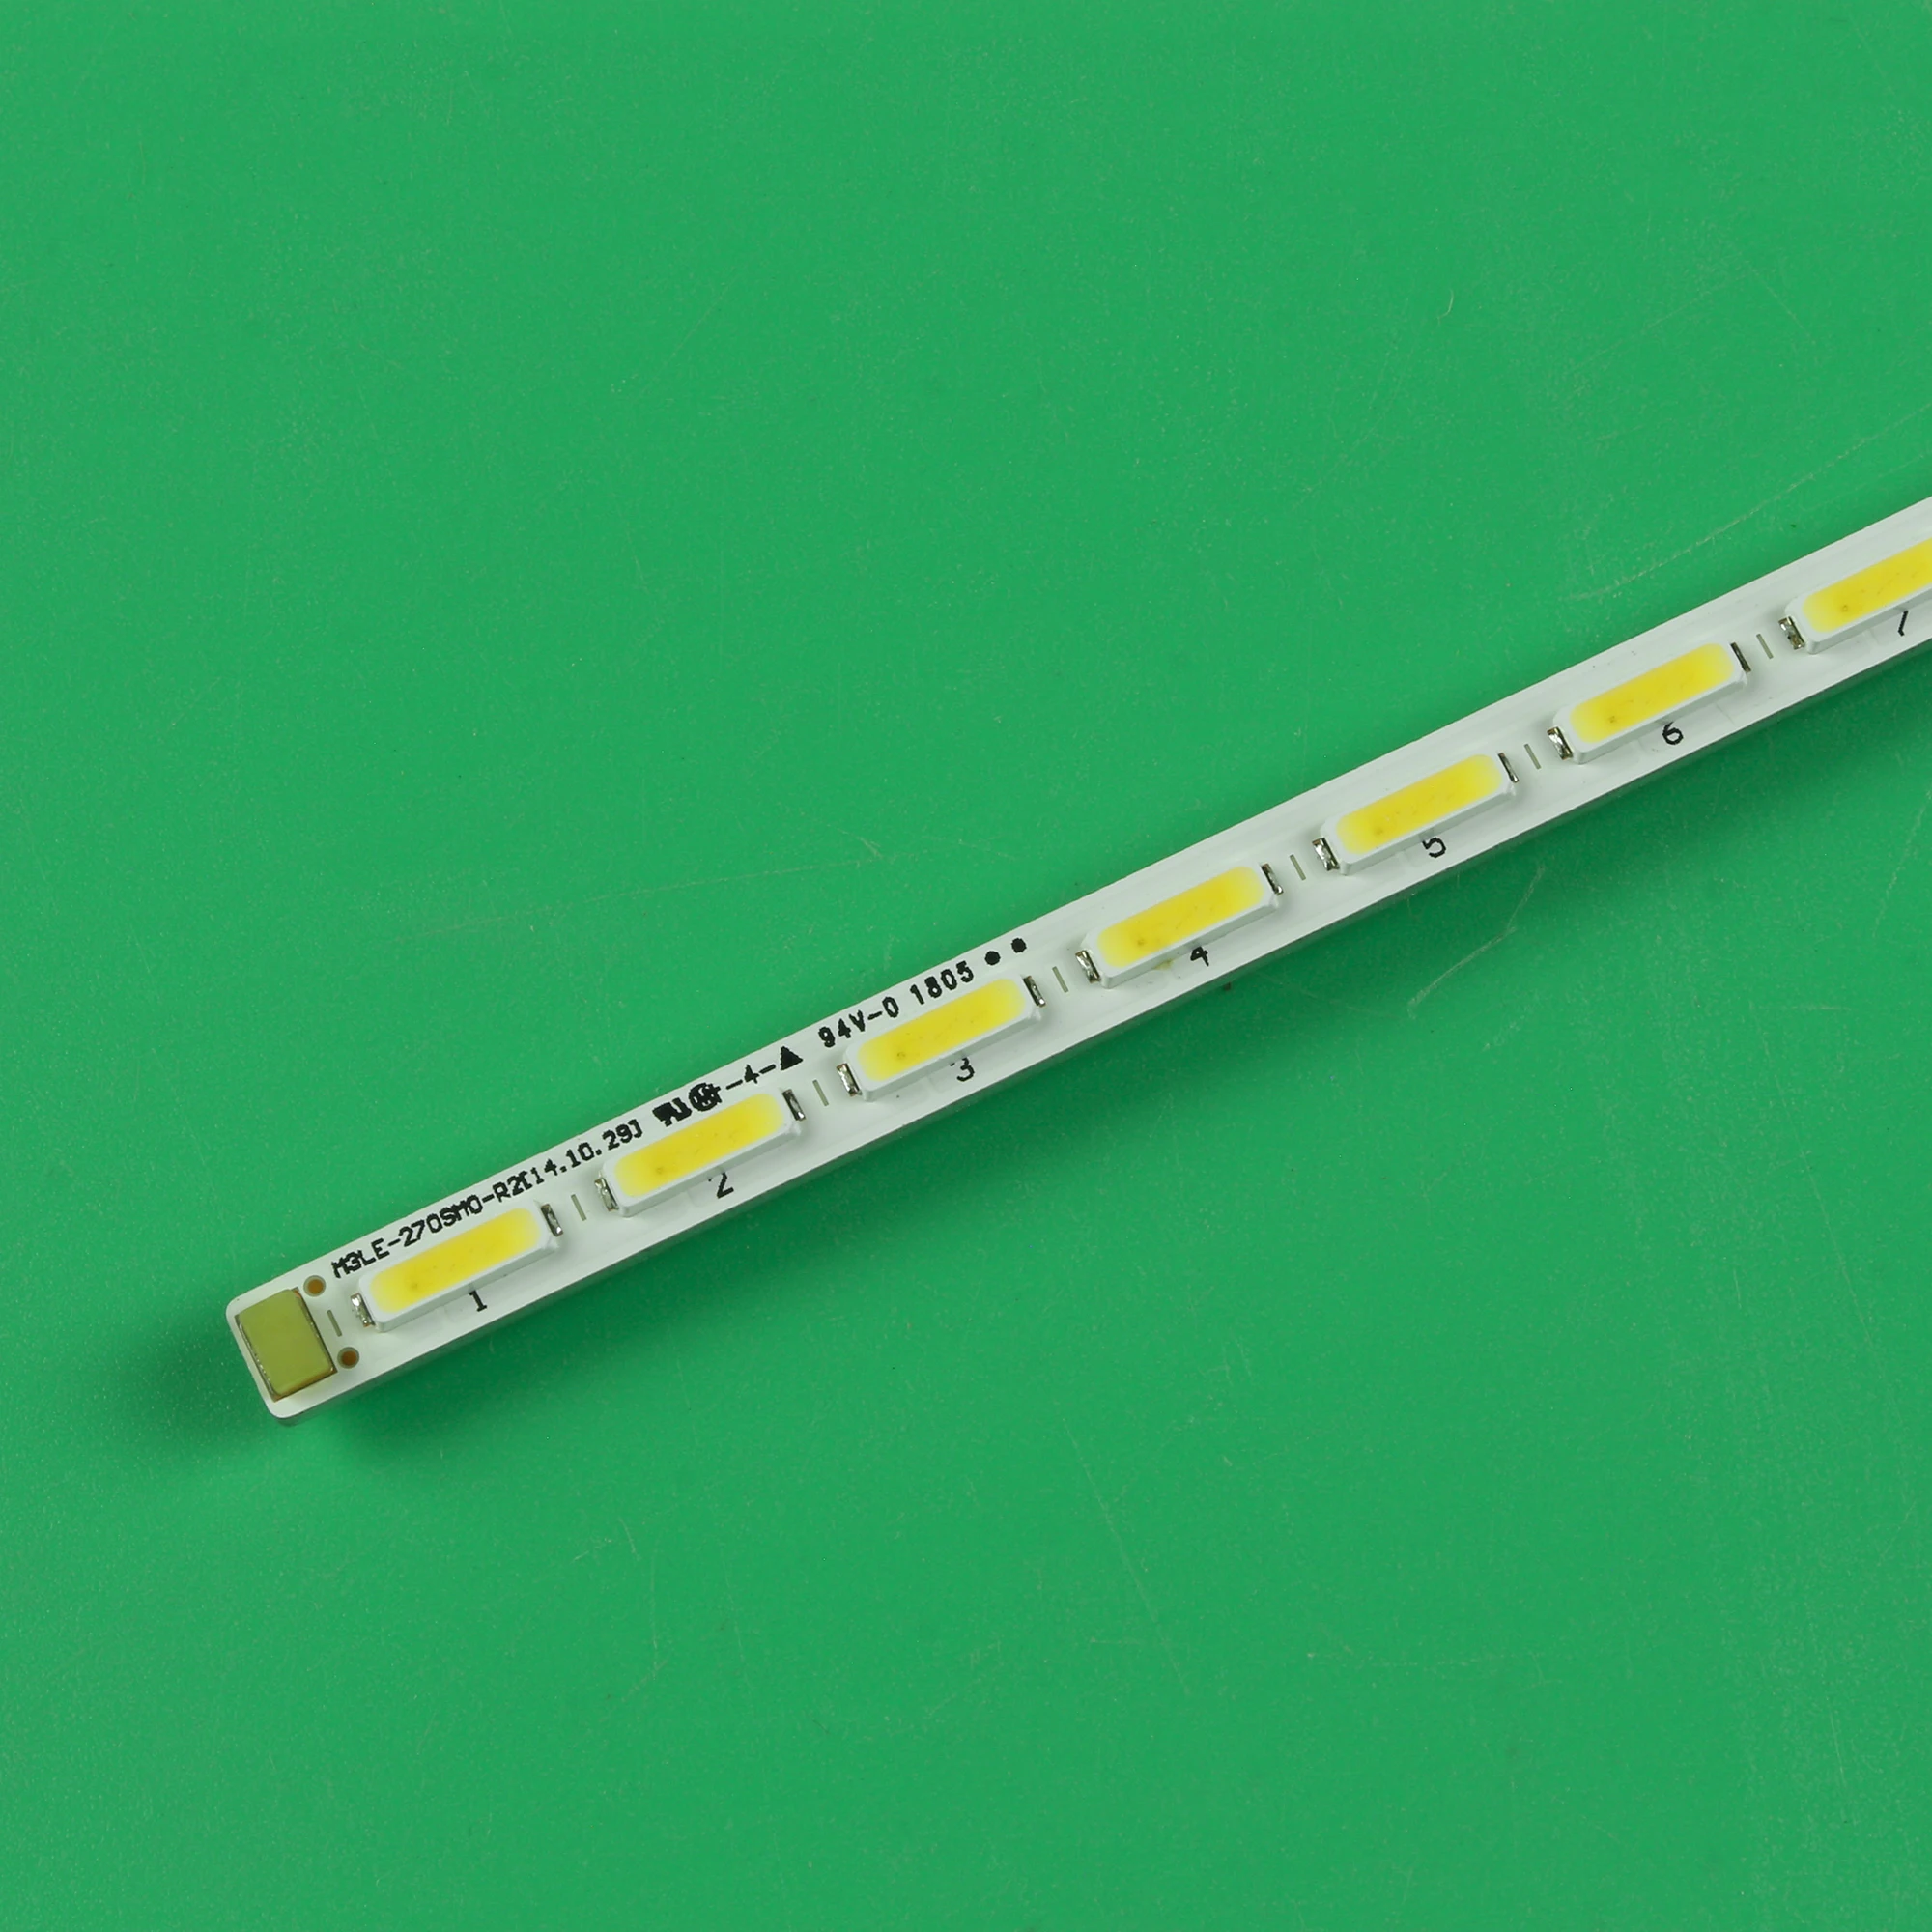 LED Backlight strip 36 Lamp For M3LE-270SM0-R0 S27E360H S27D360H M3LE-270SM0-R2 R4 CY-MJ270BNLV1V S27D390H LS27E390HS T27D390EX images - 6